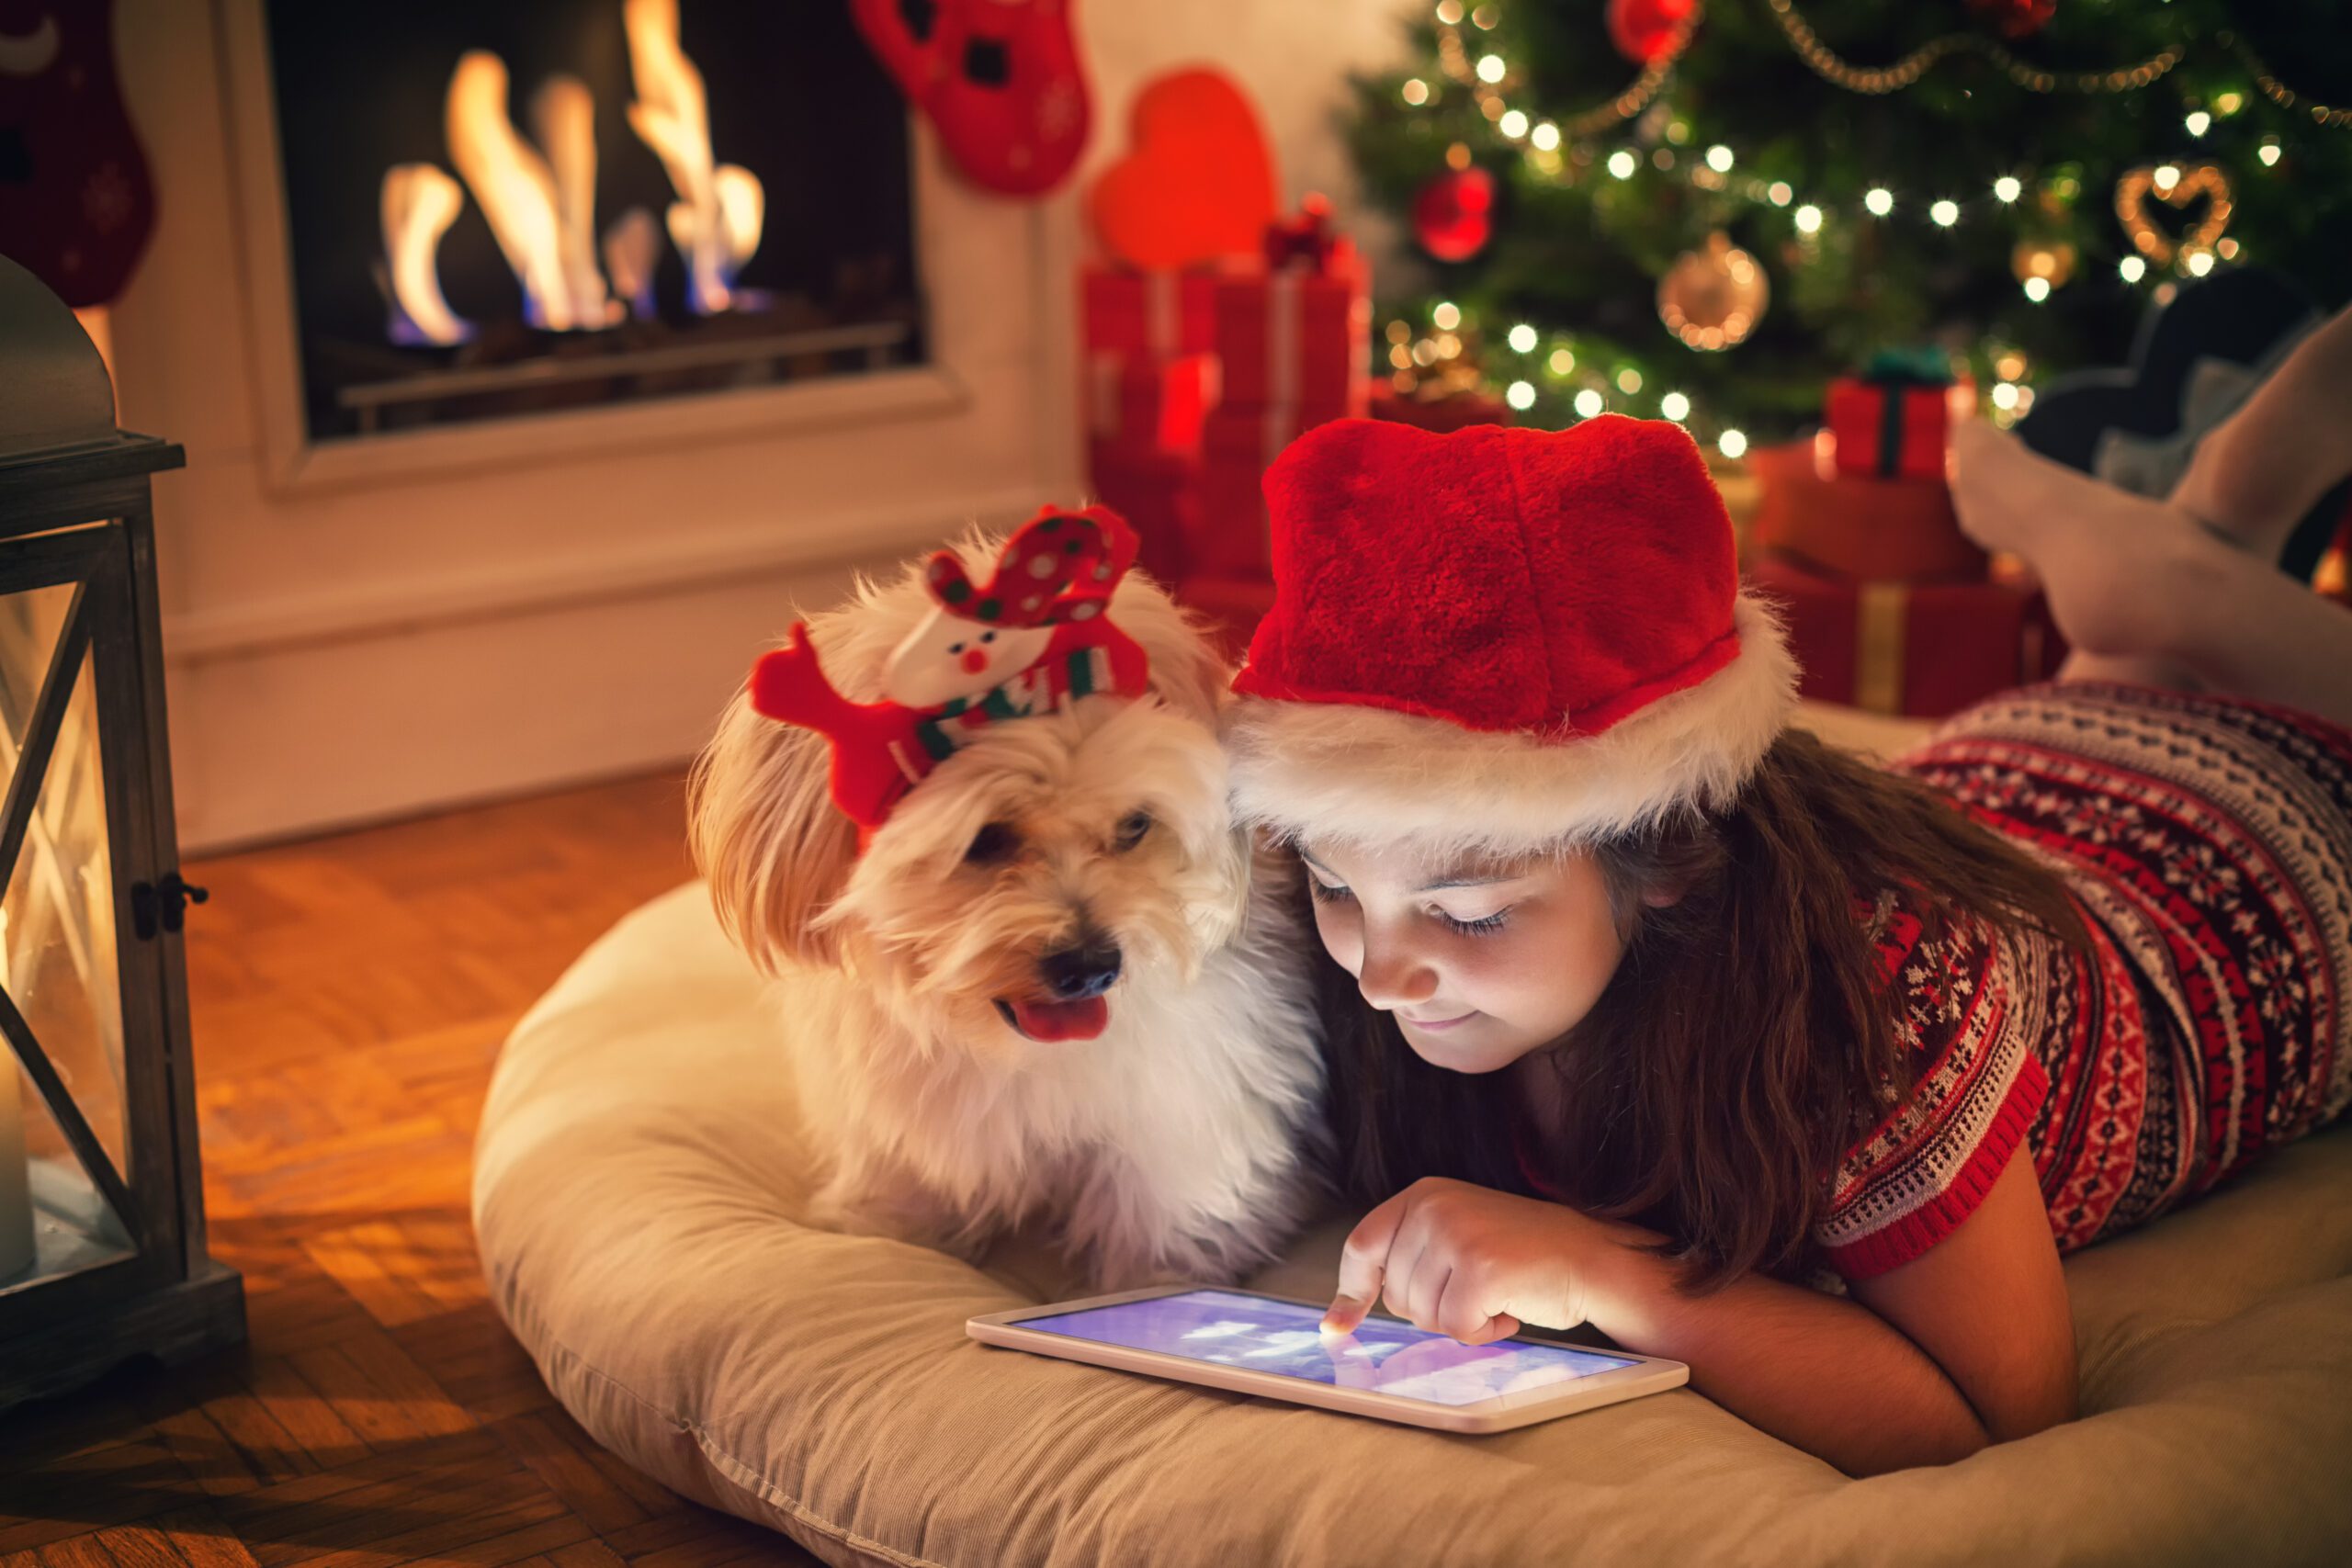 Little girl playing games with dog during the holidays